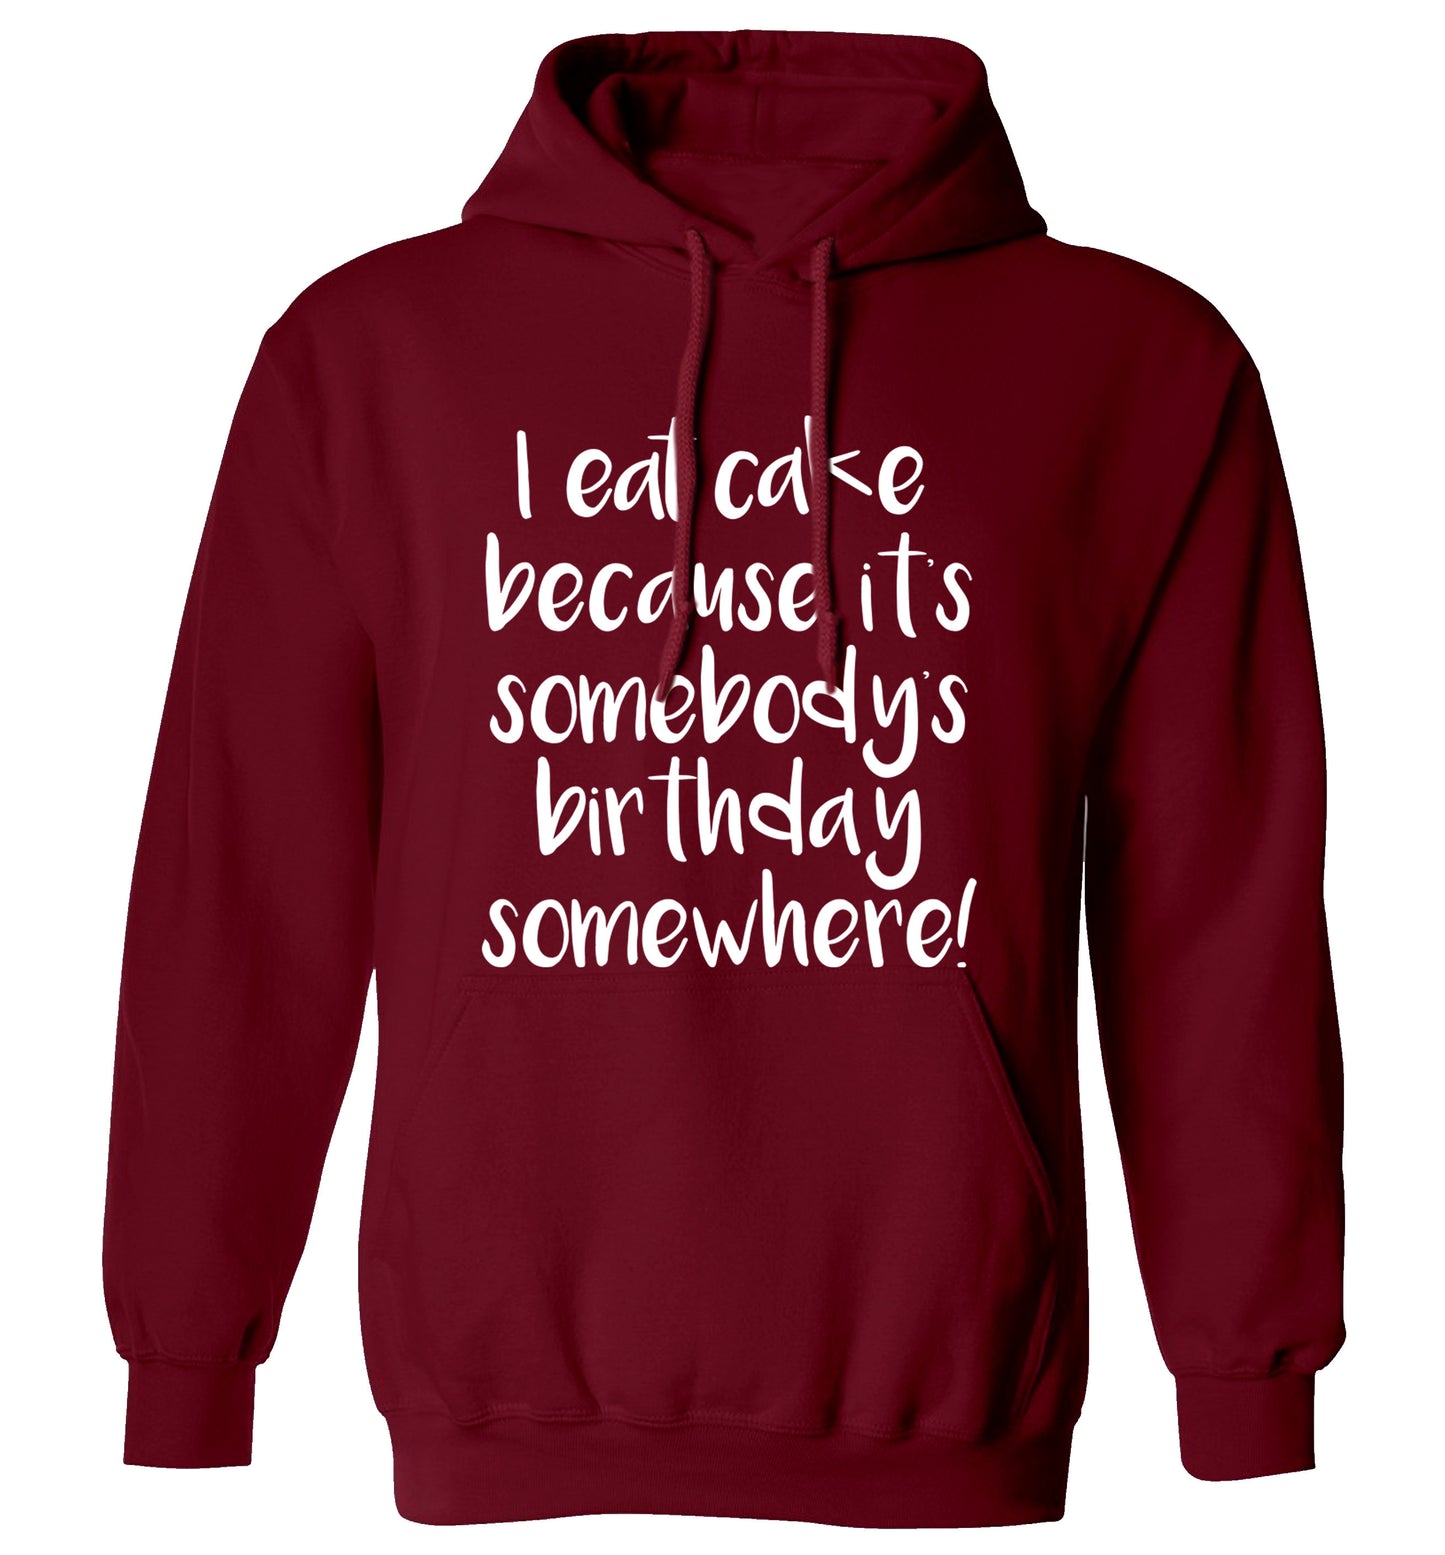 I eat cake because it's somebody's birthday somewhere! adults unisex maroon hoodie 2XL